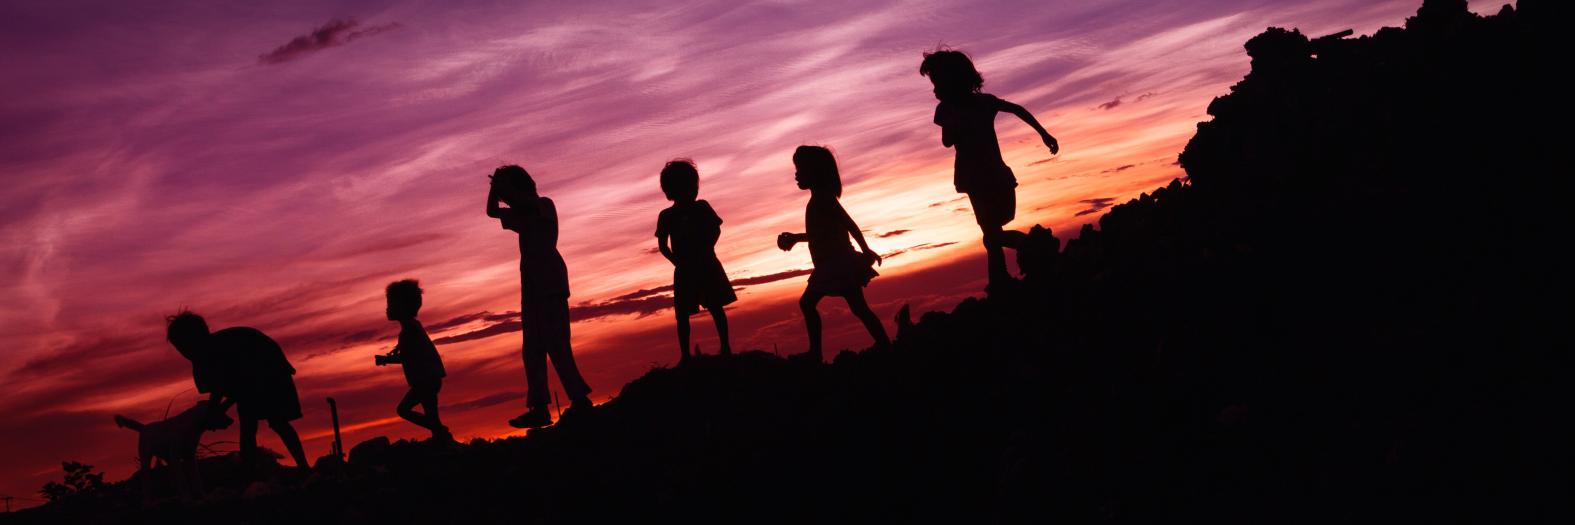 Silhouetted Children 